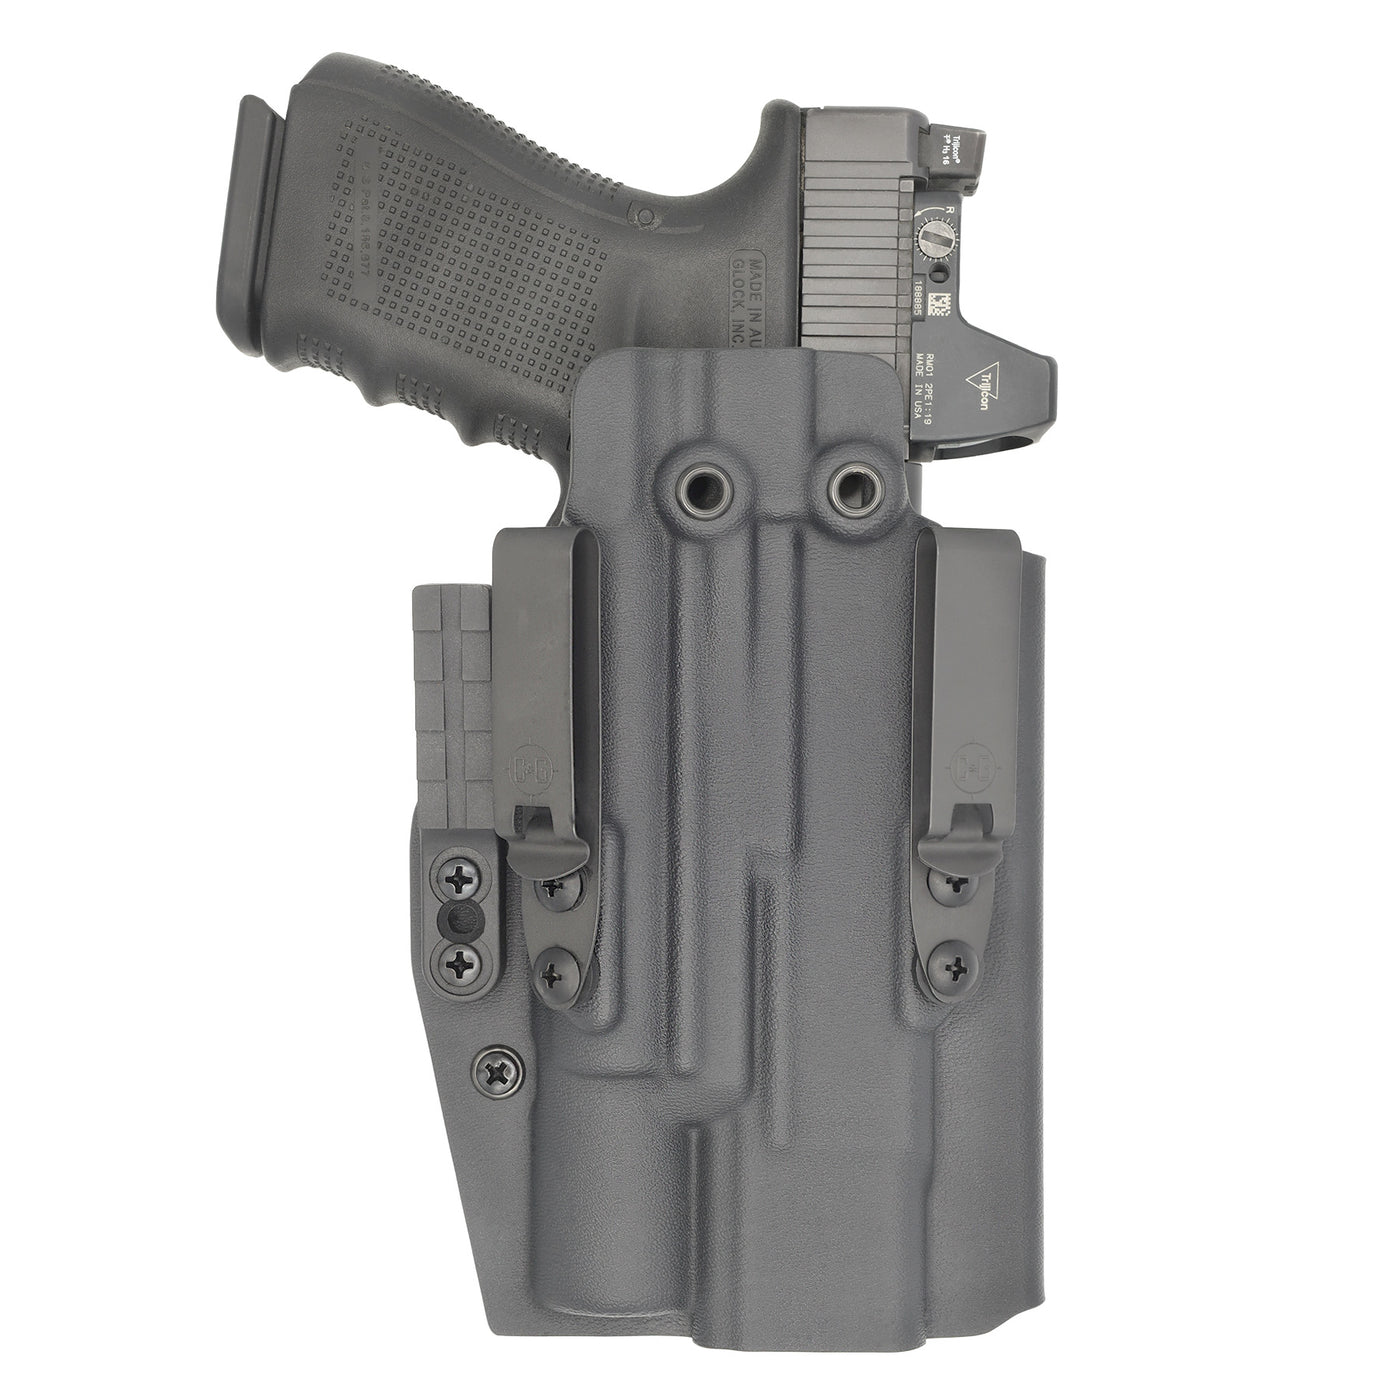 C&G Holsters custom IWB Tactical ALPHA UPGRADE Poly80 Surefire X300 in holstered position